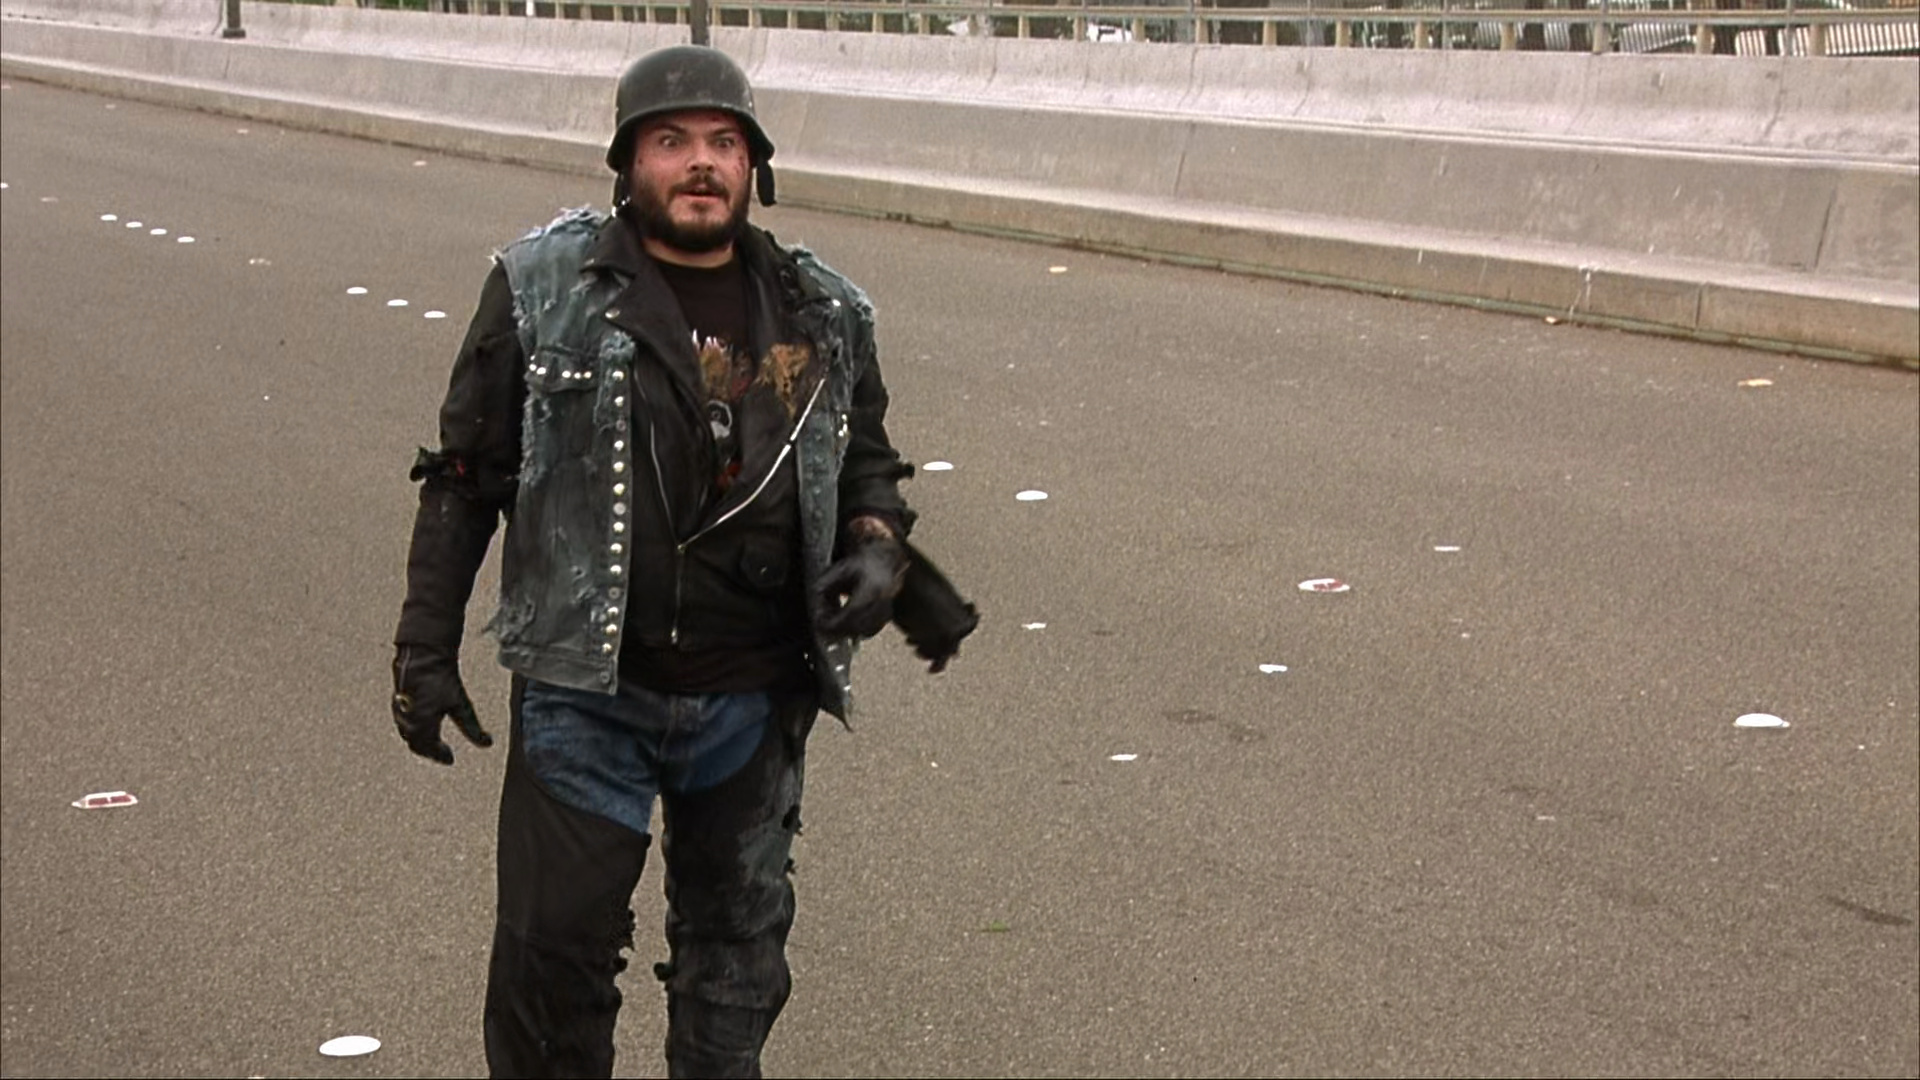 Jack Black as the Motorcyclist in Anchorman: The Legend of Ron Burgundy